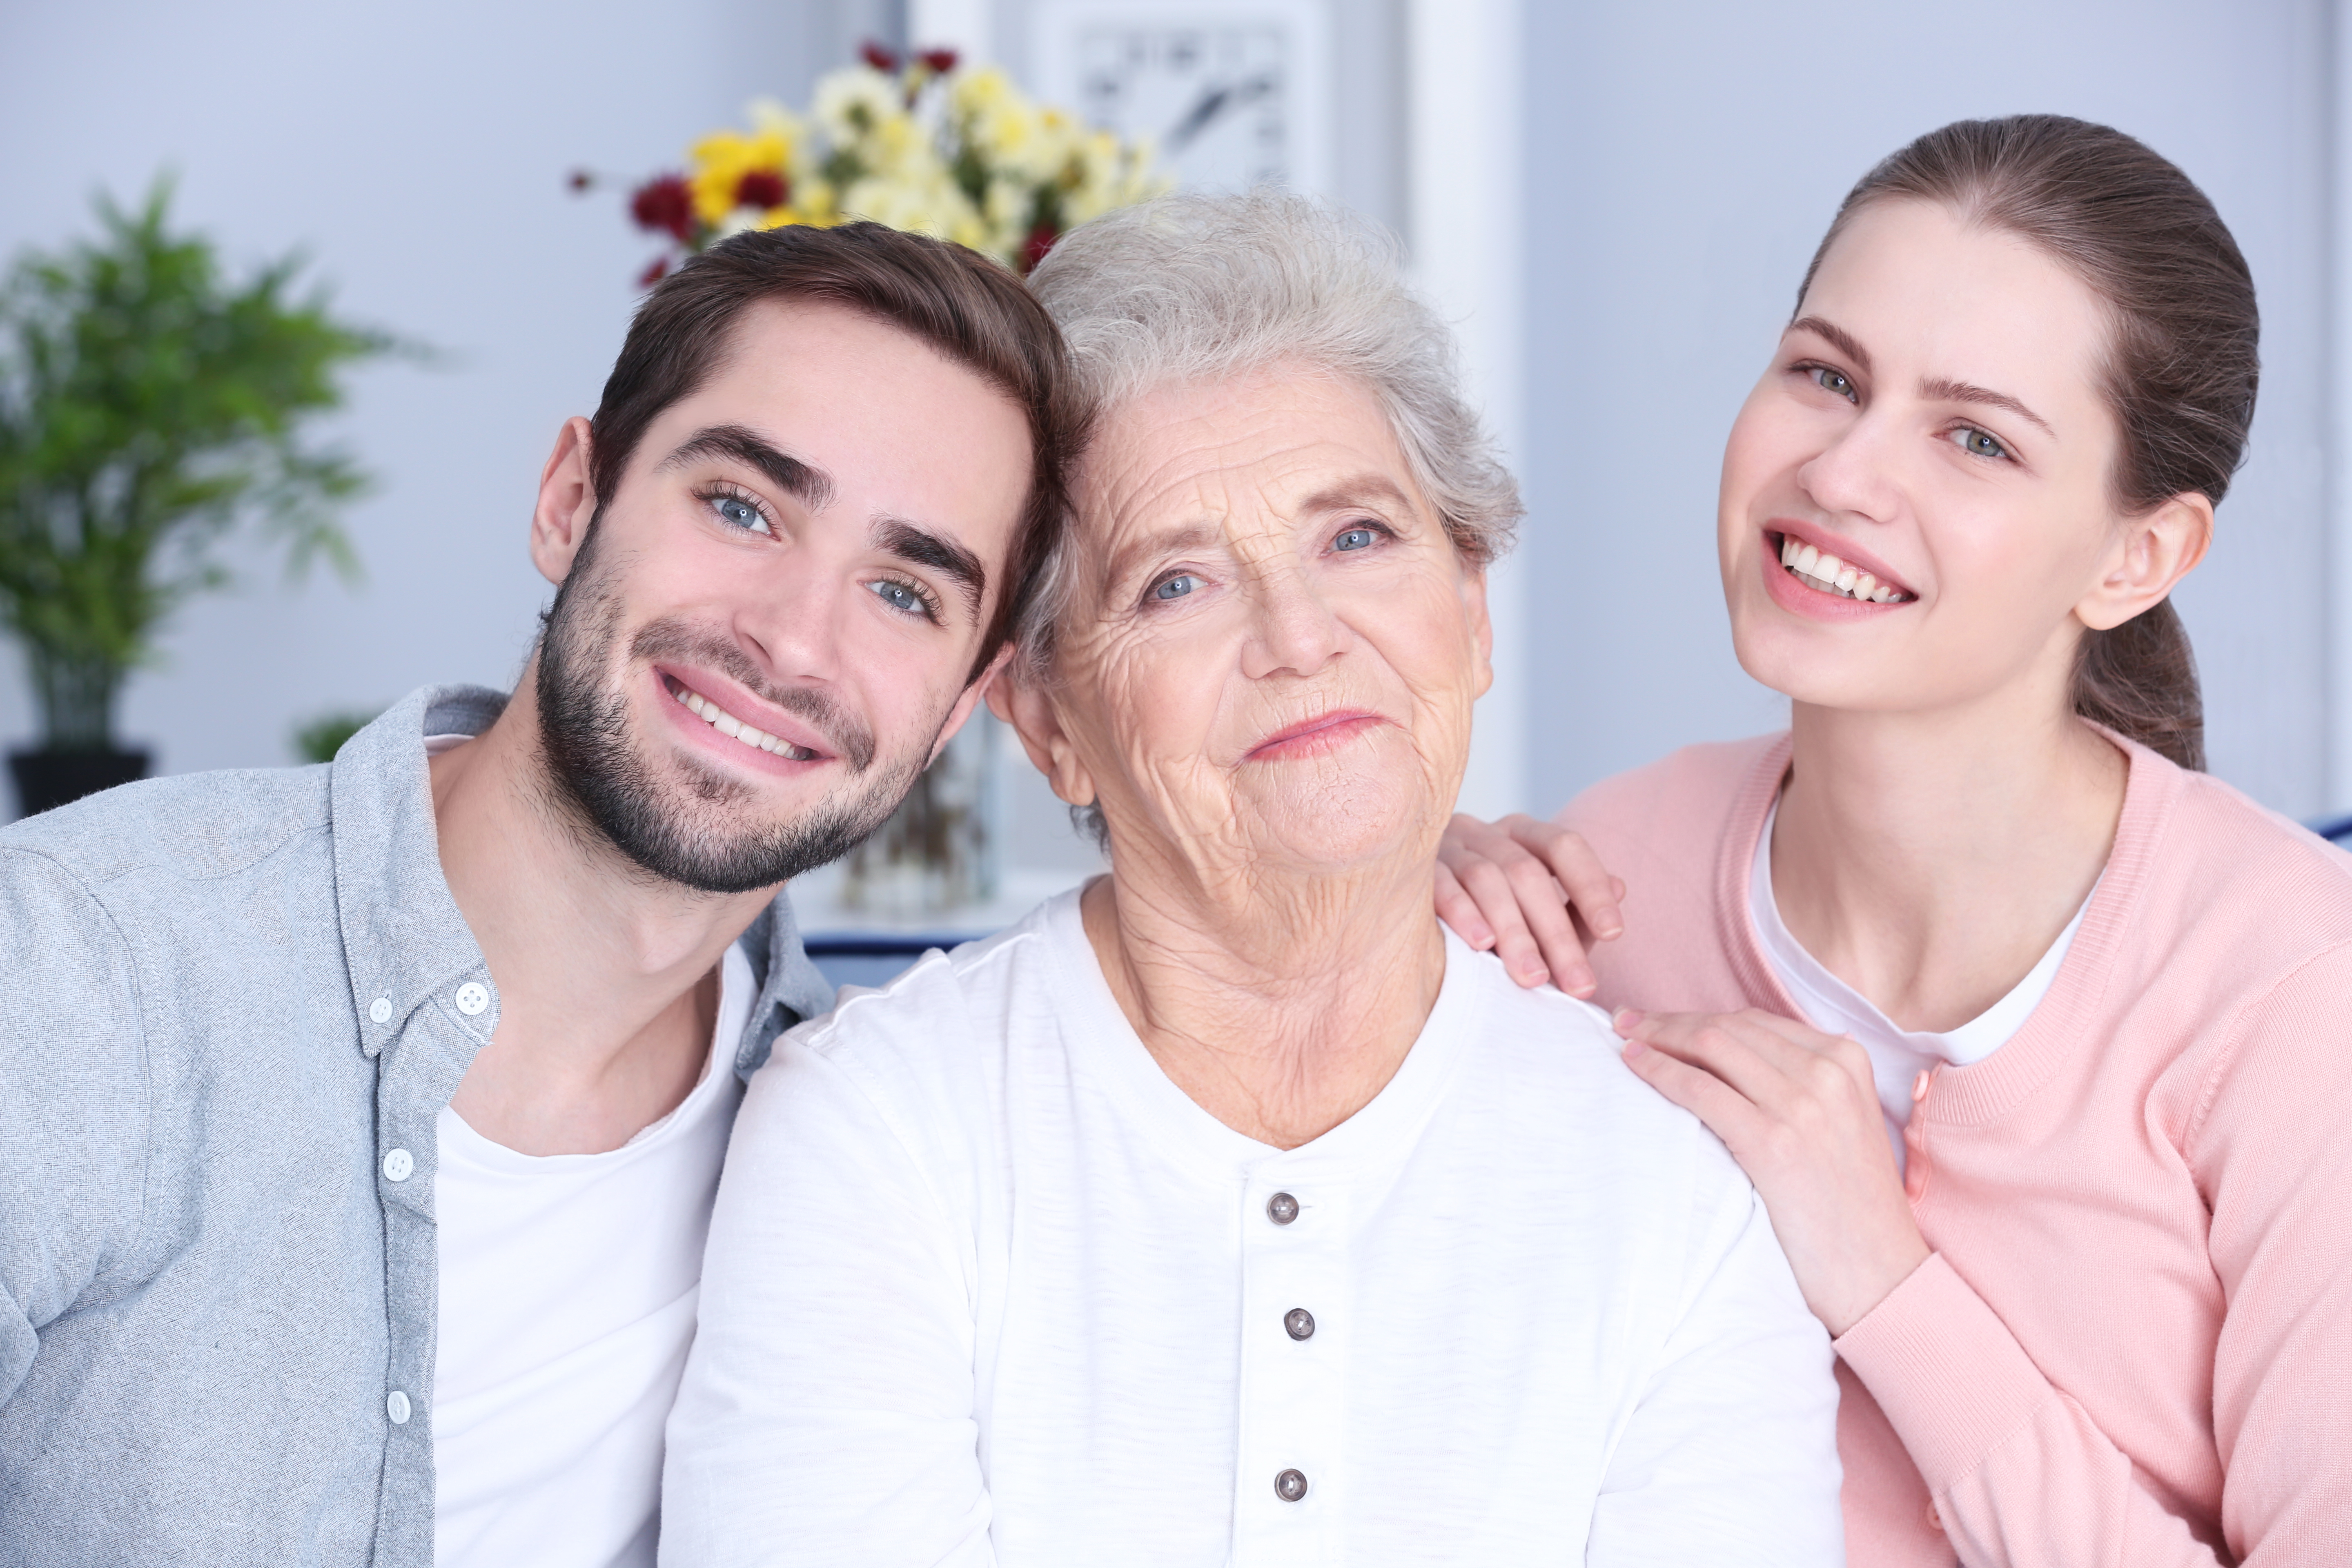 A senior woman with her son and daughter | Source: Shutterstock